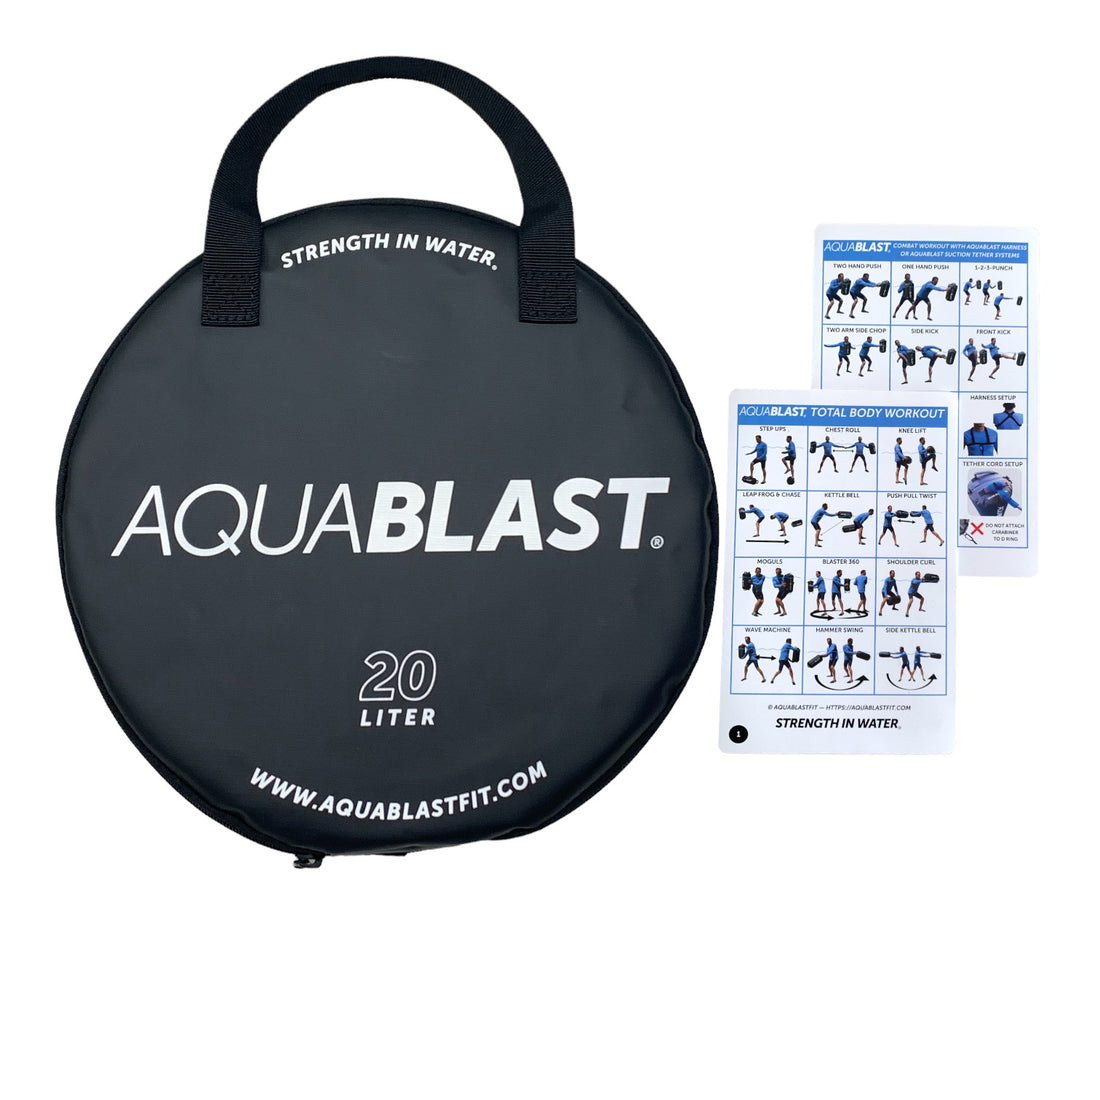 AquaBLAST 20 Liter Fitness and Punching Bag with waterproof workout cards